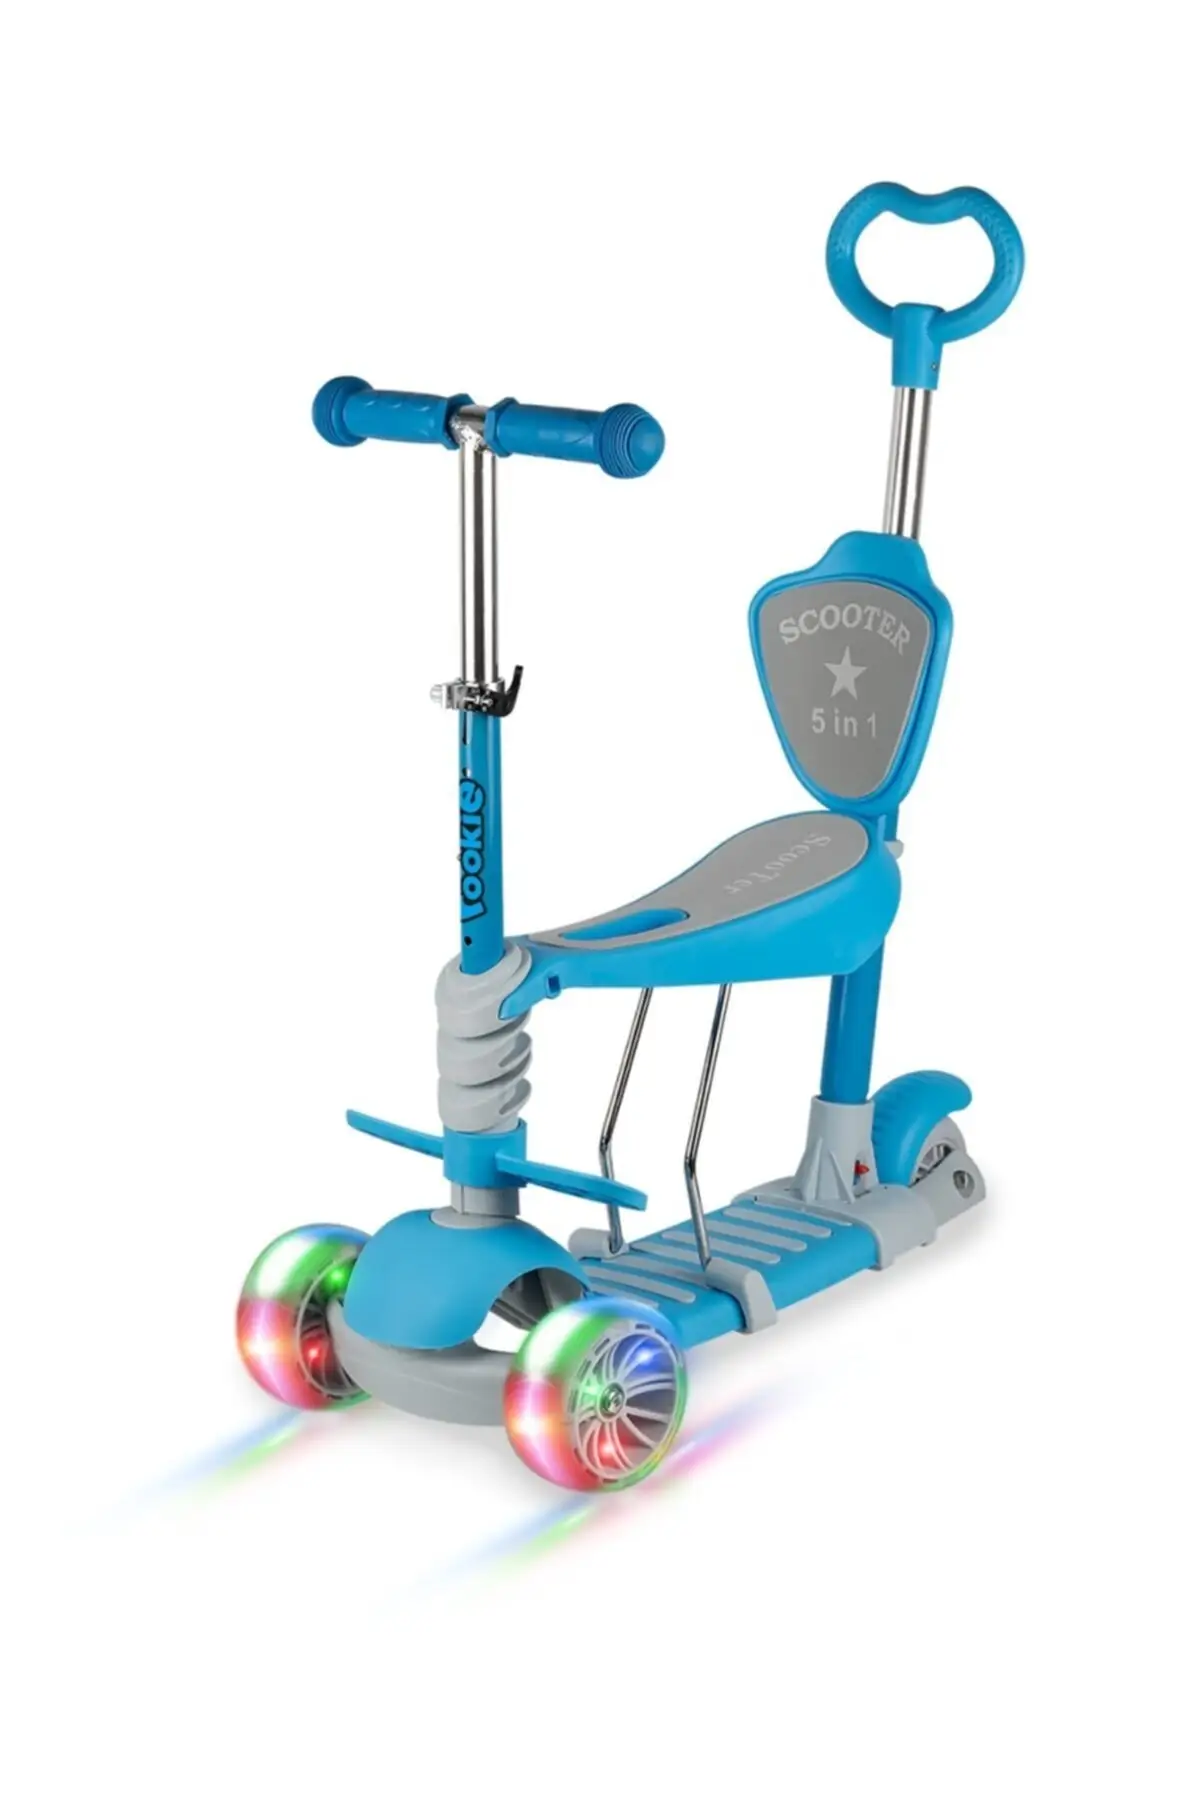 Coup de scooters,pied scooters